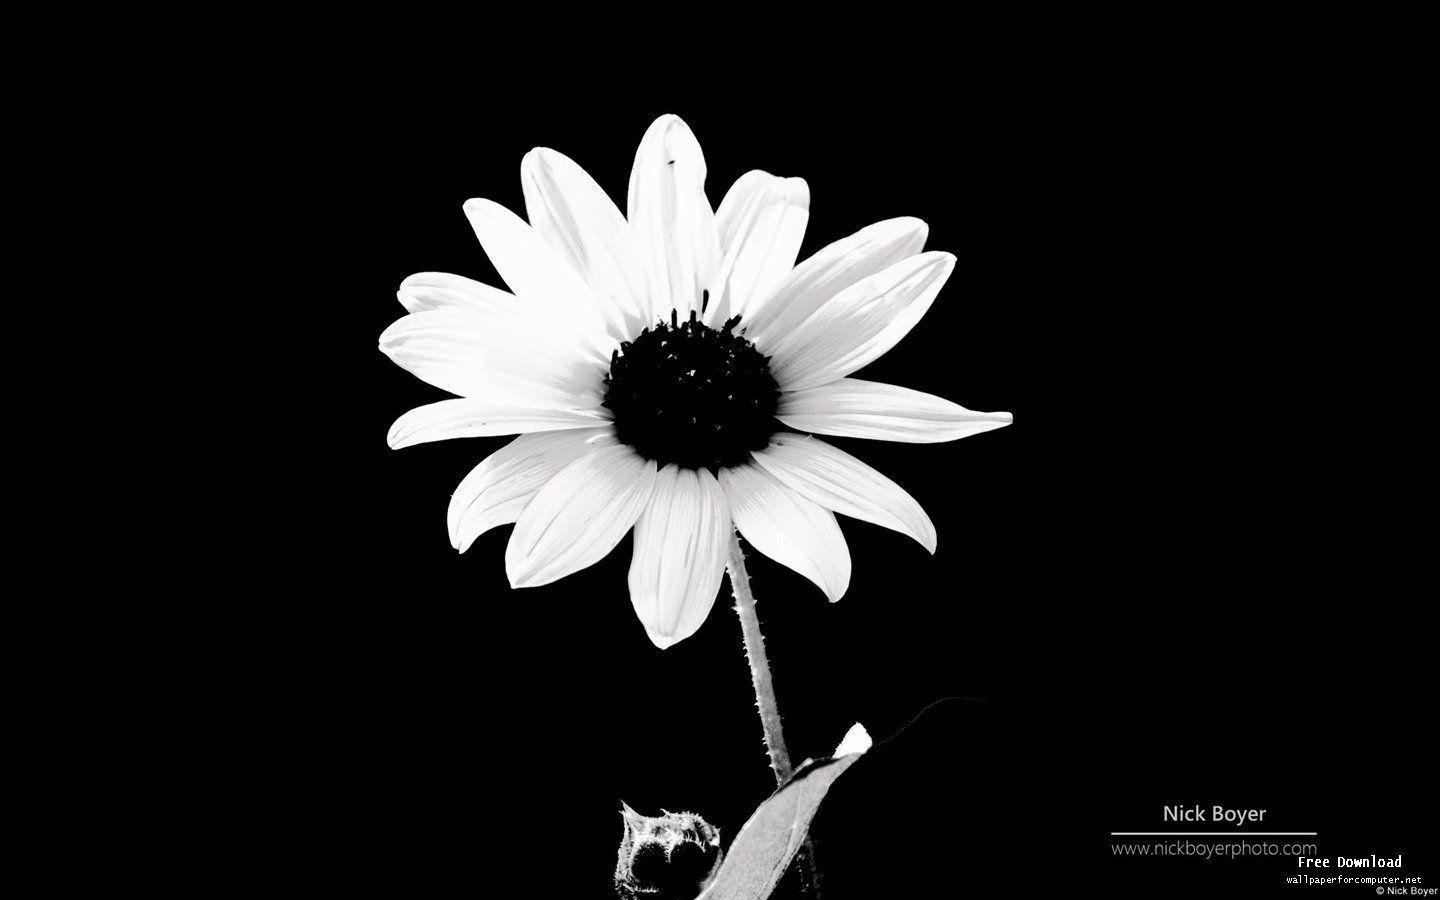 Black and White Flowers wallpaper 1440x900